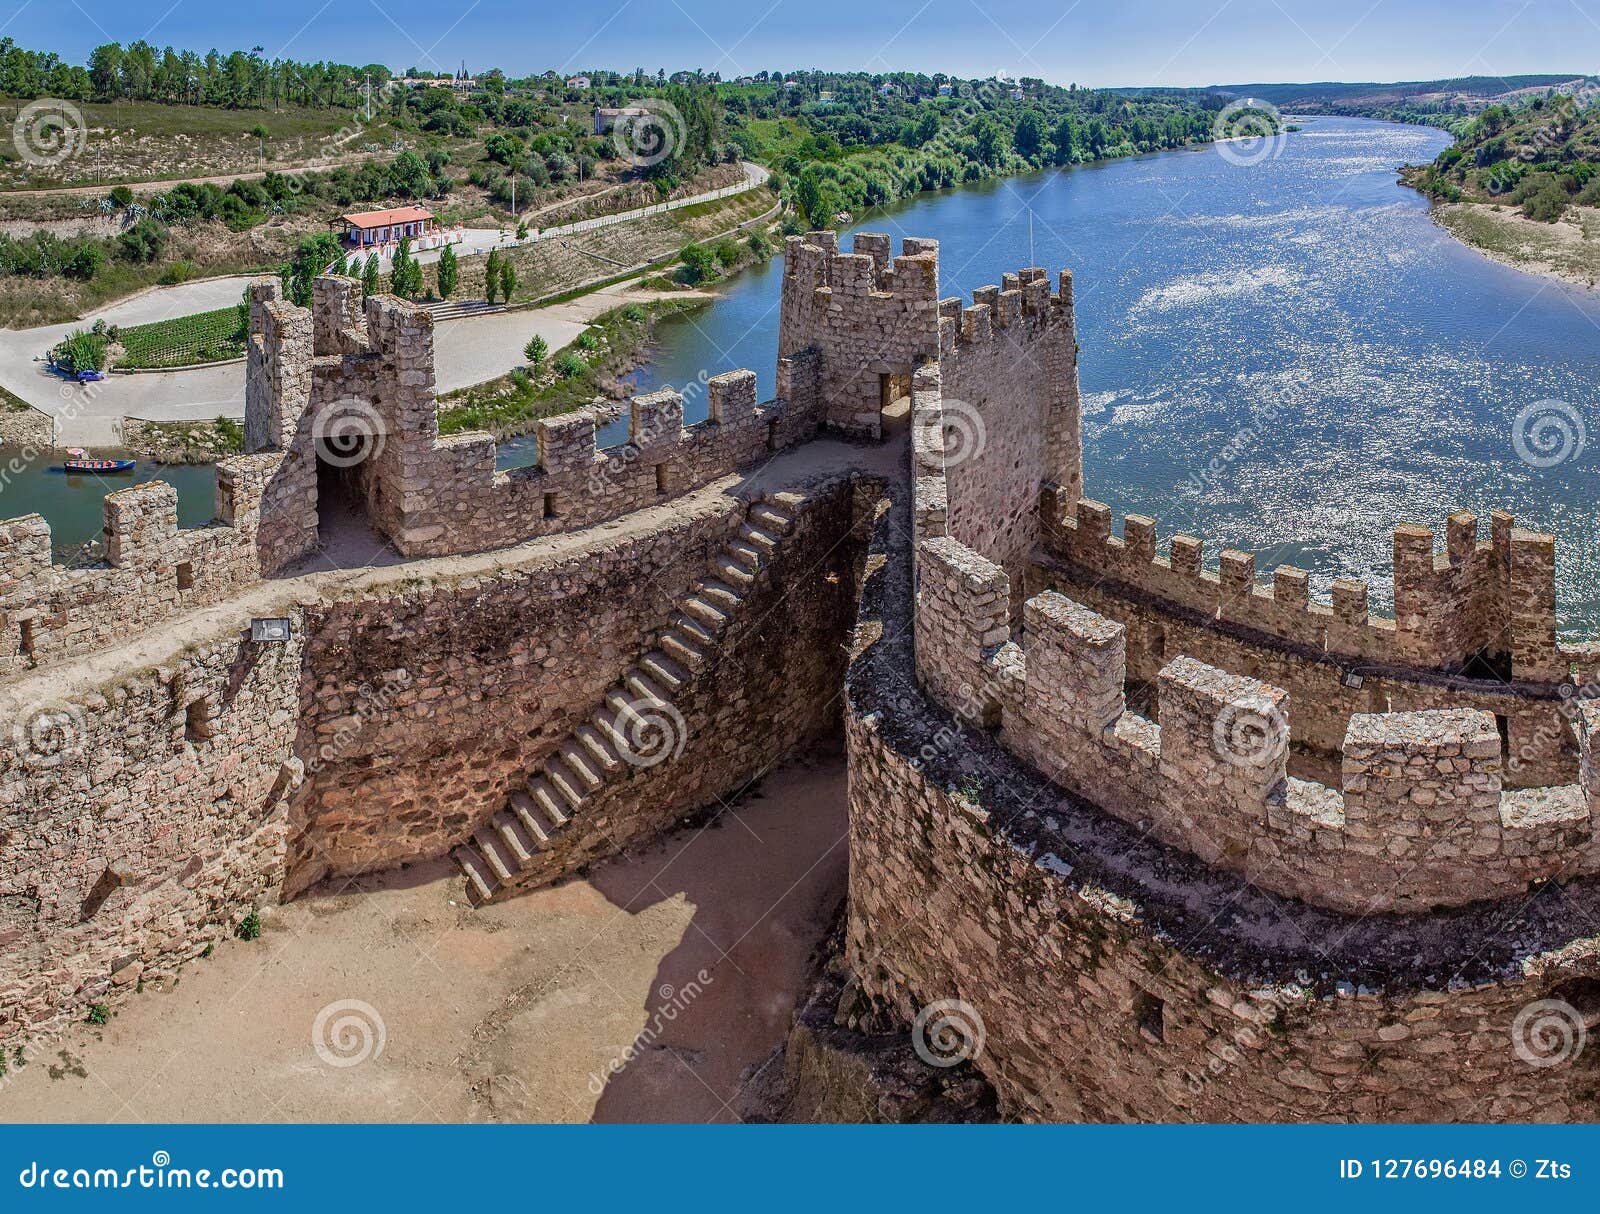 Almourol Portugal Castle Of Almourol An Iconic Knights Templar Fortress Editorial Stock Image Image Of Building Medieval 127696484